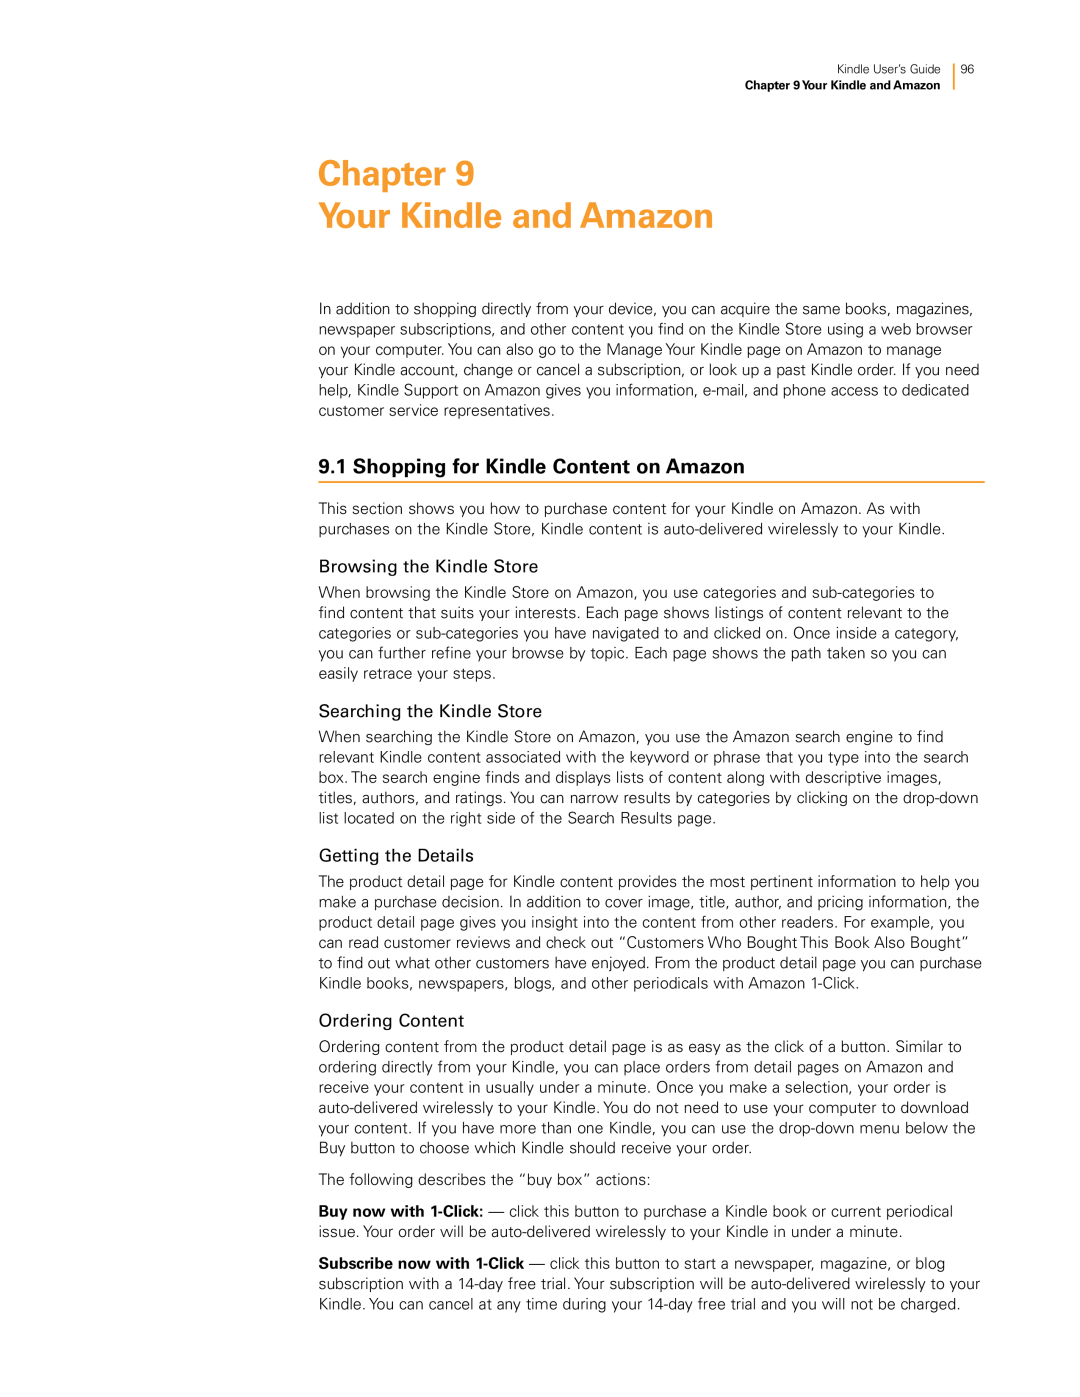 Amazon KNDKYBRD3G manual Chapter Your Kindle and Amazon, Shopping for Kindle Content on Amazon, Browsing the Kindle Store 